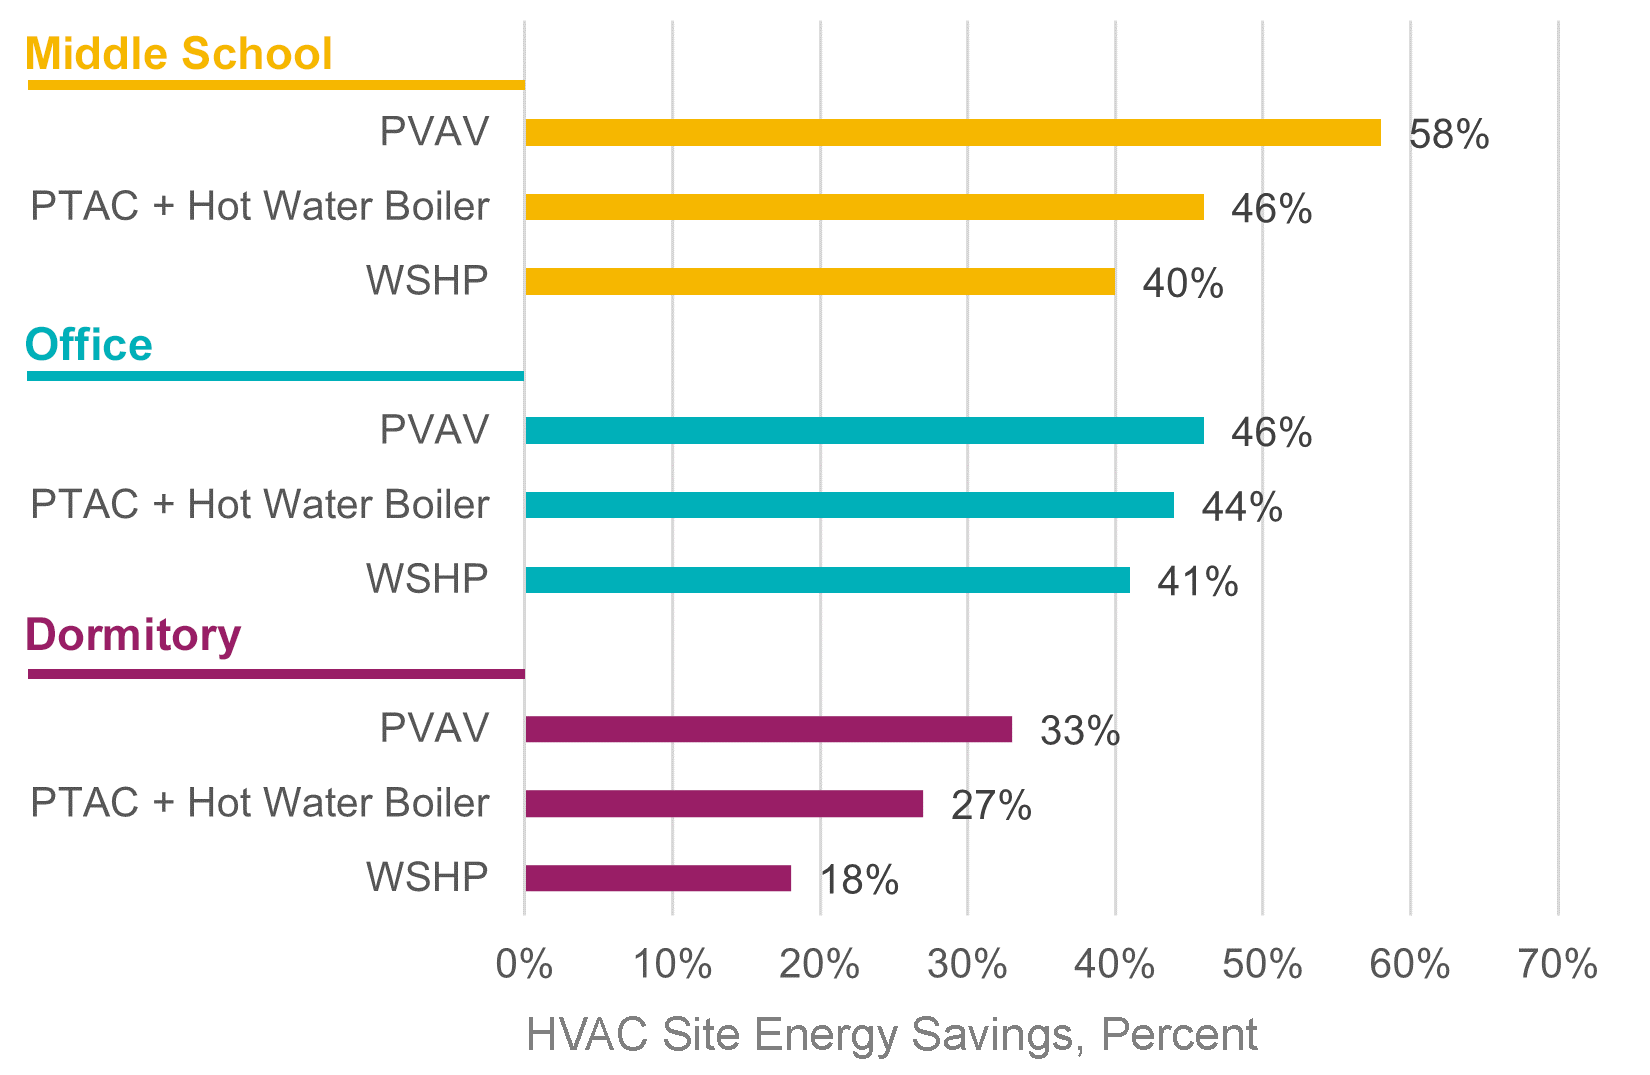 Chart of site energy savings of VRF compared to other HVAC systems